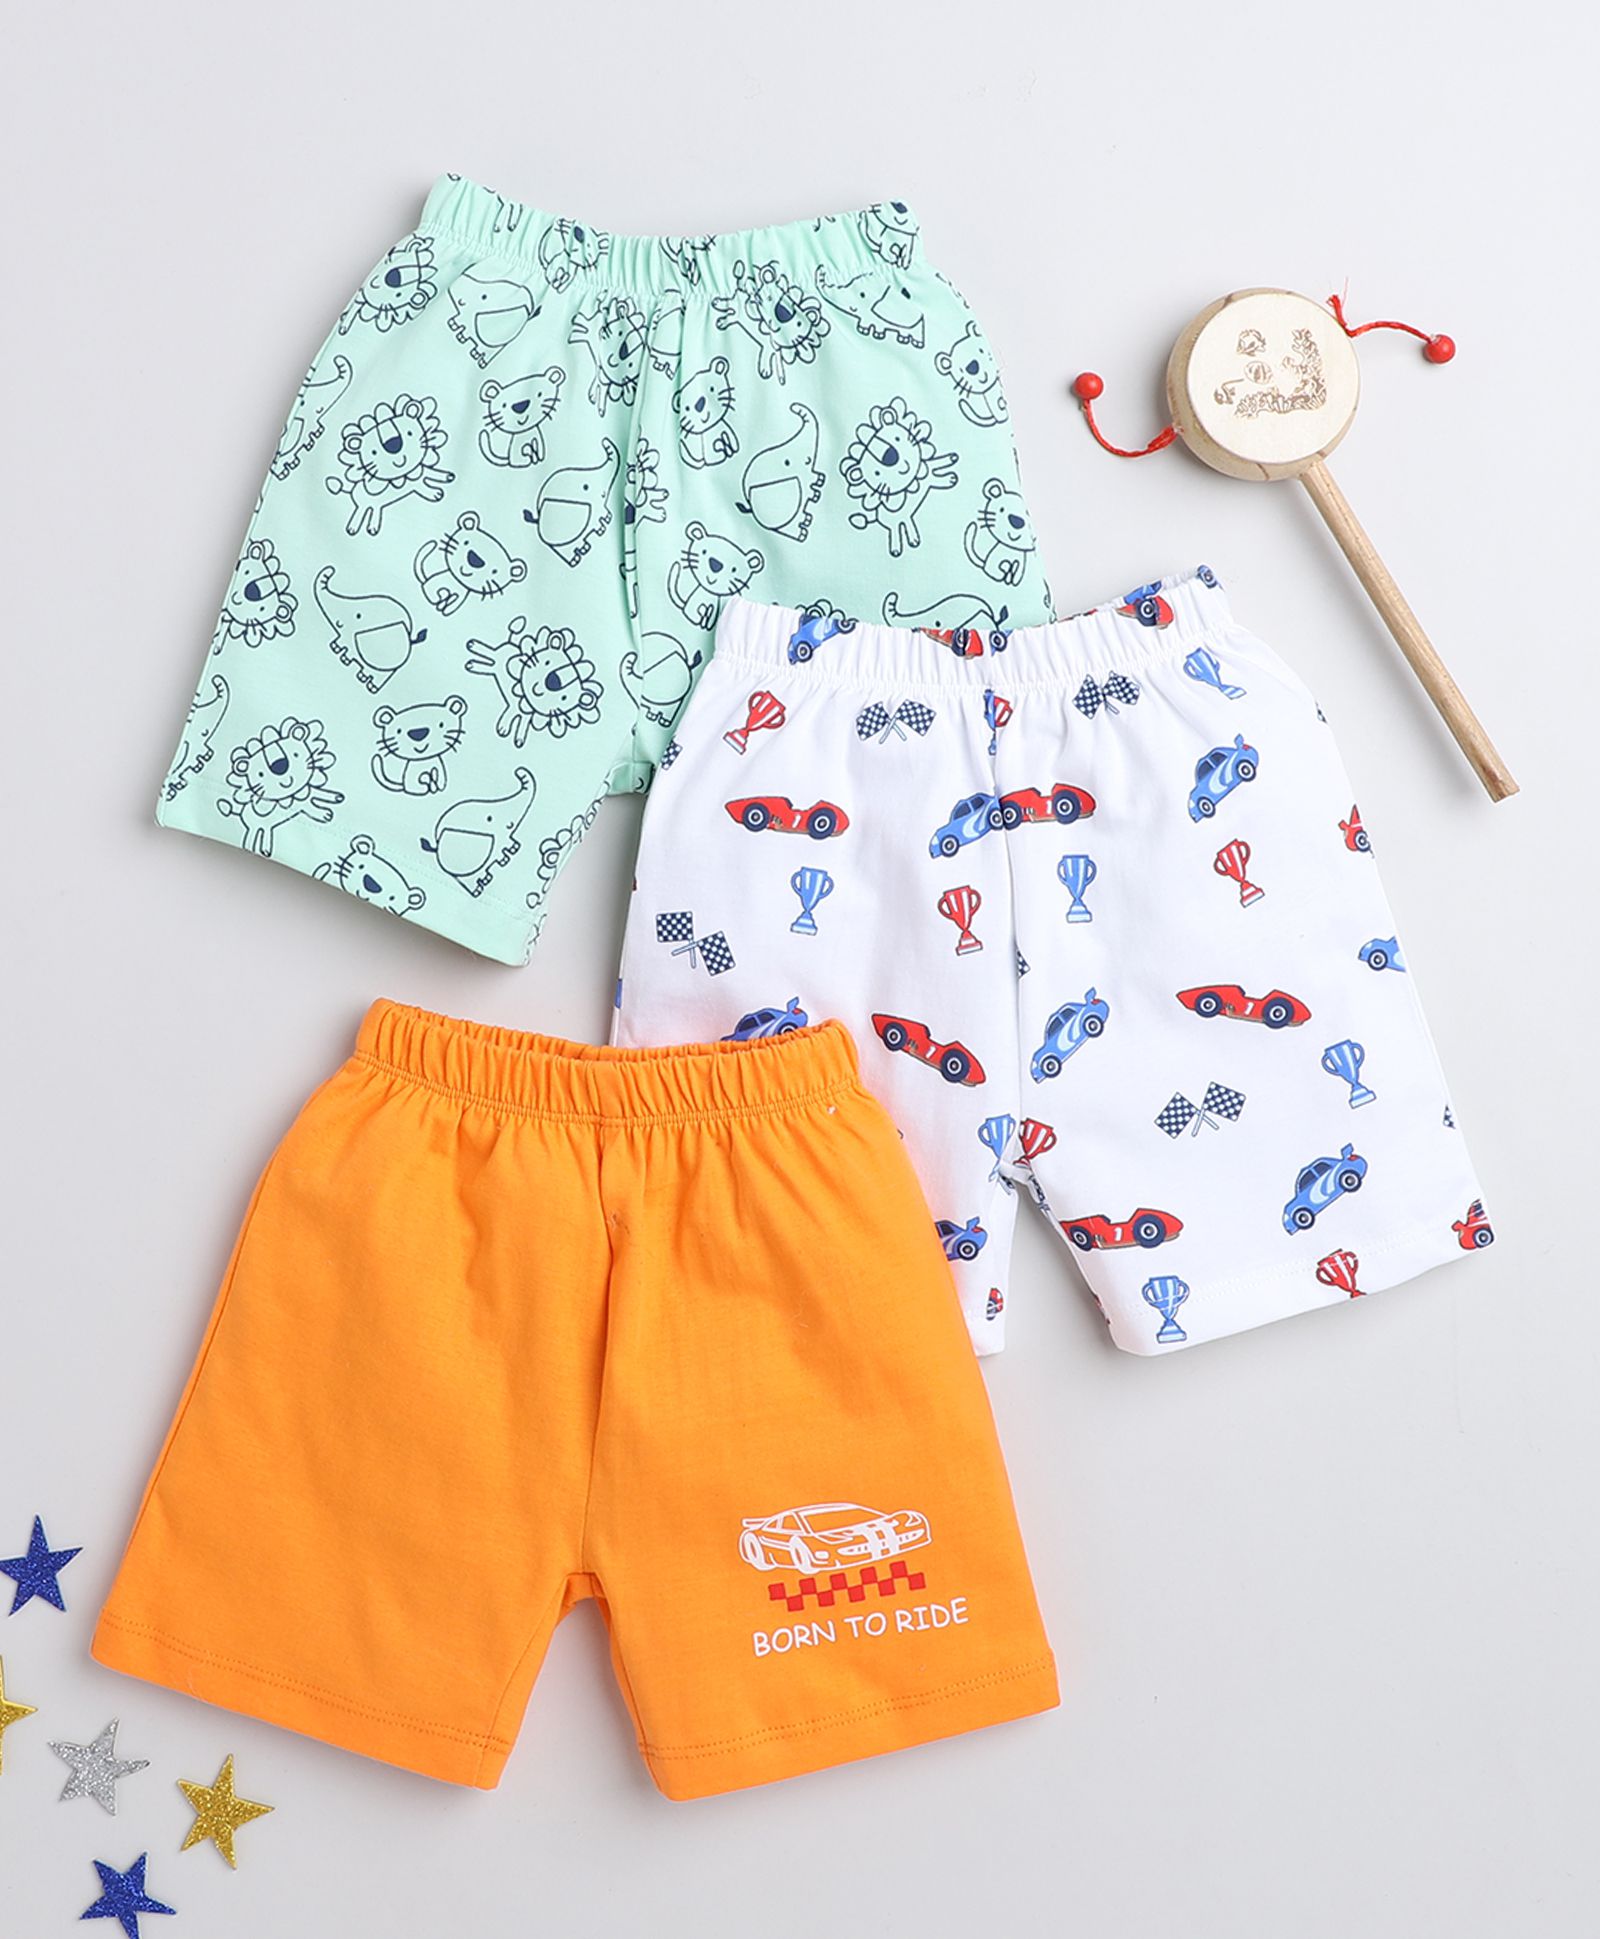     			BUMZEE Green & Orange Boys Shorts Pack Of 3 Age - 6-12 Months